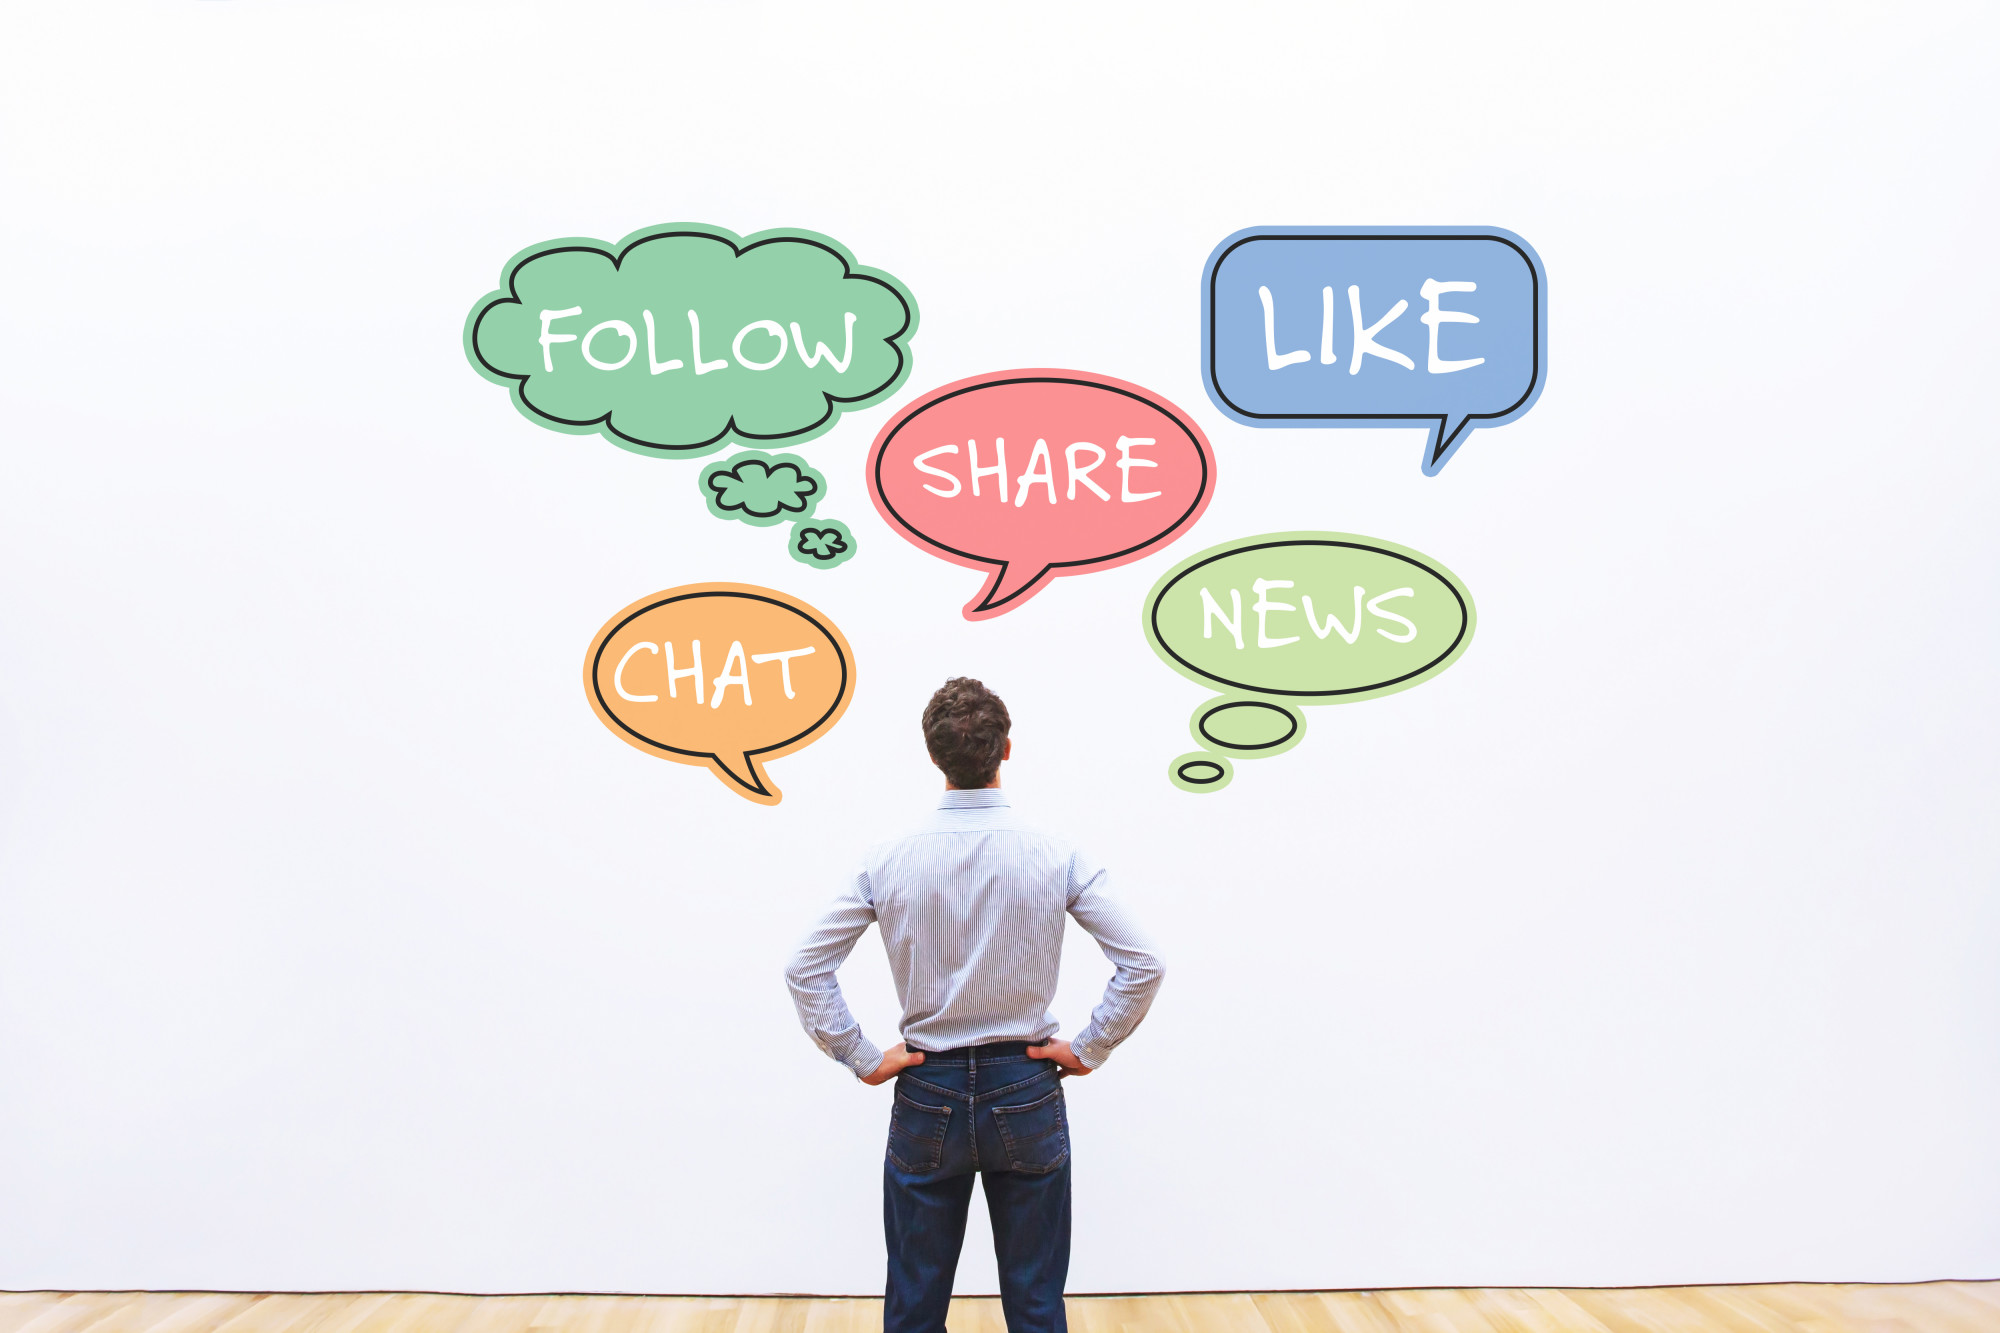 7 Tips for Building a Social Media Marketing Strategy That Works